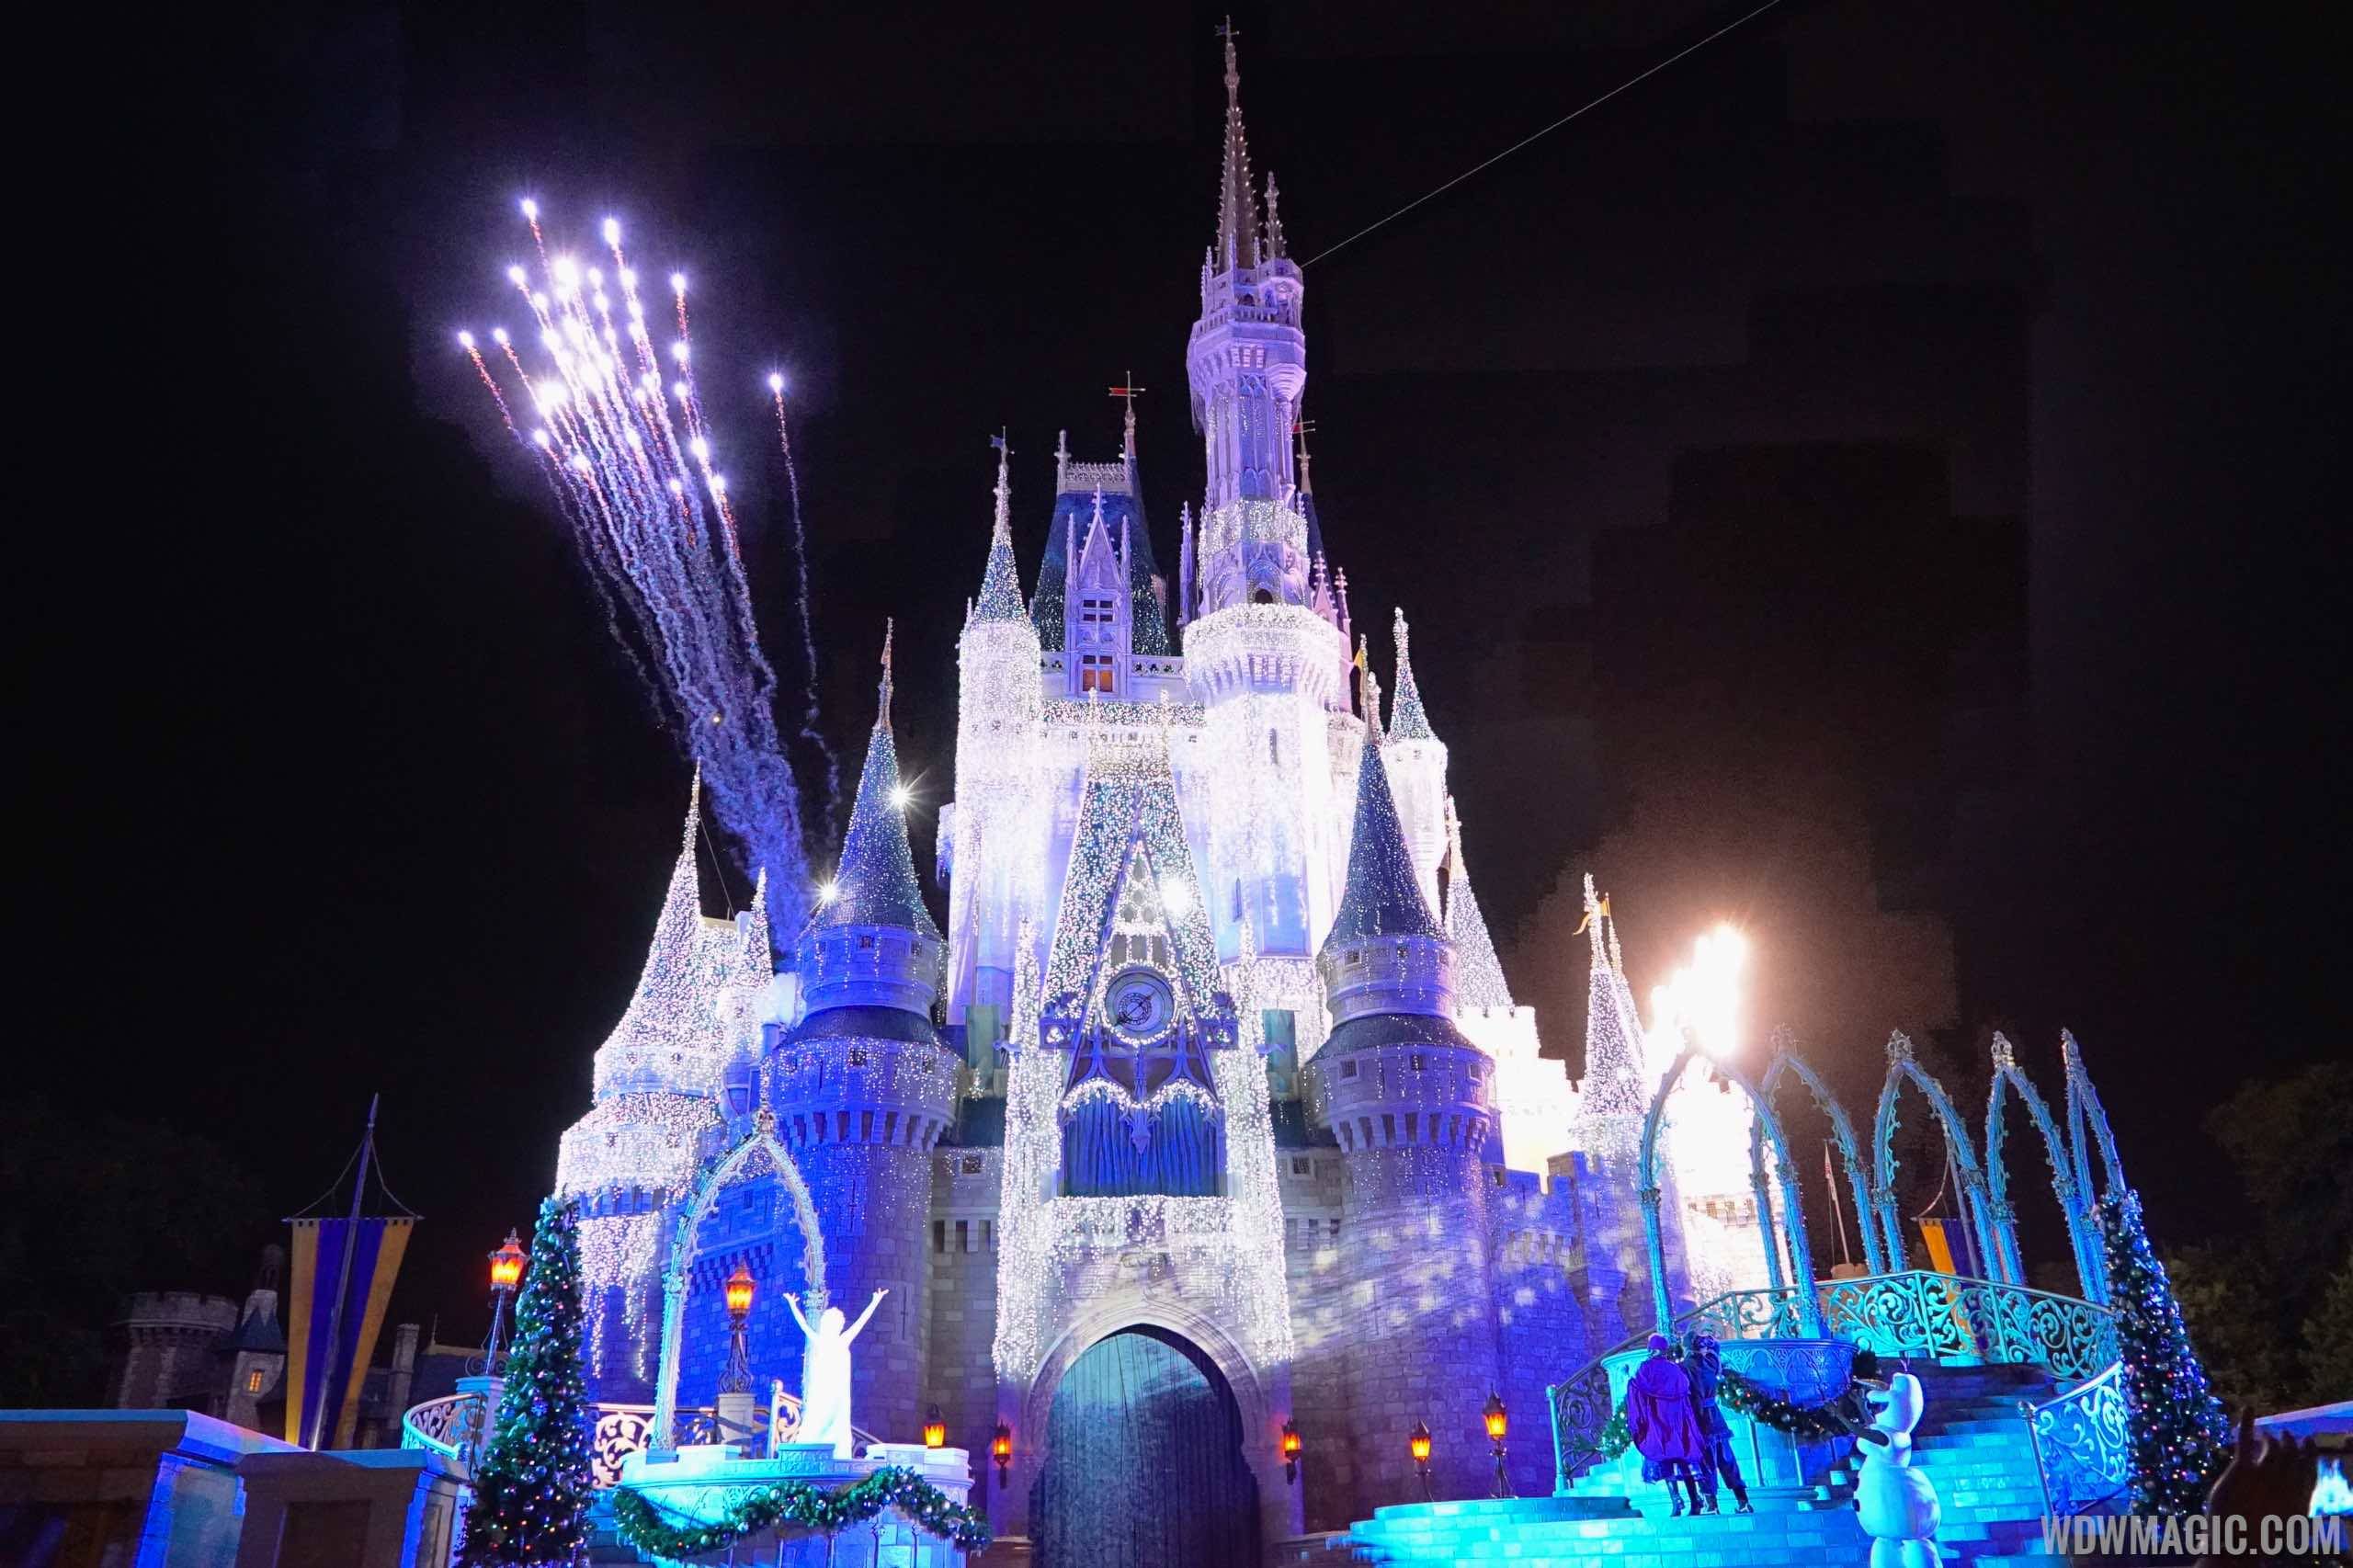 A Frozen Holiday Wish opening show